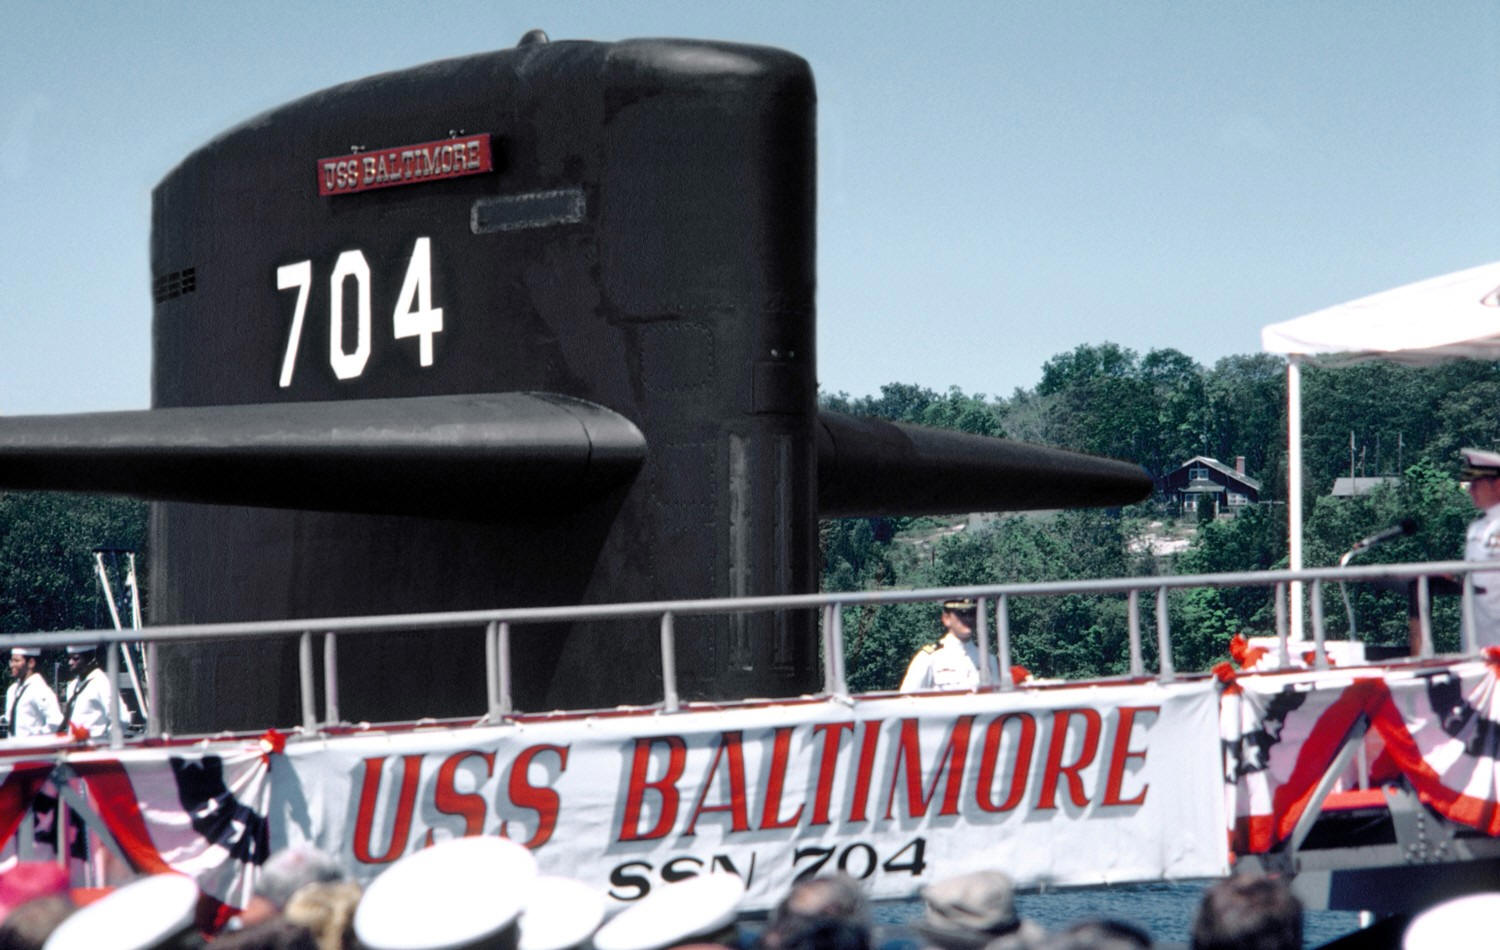 ssn-704 uss baltimore commissioning ceremony july 1982